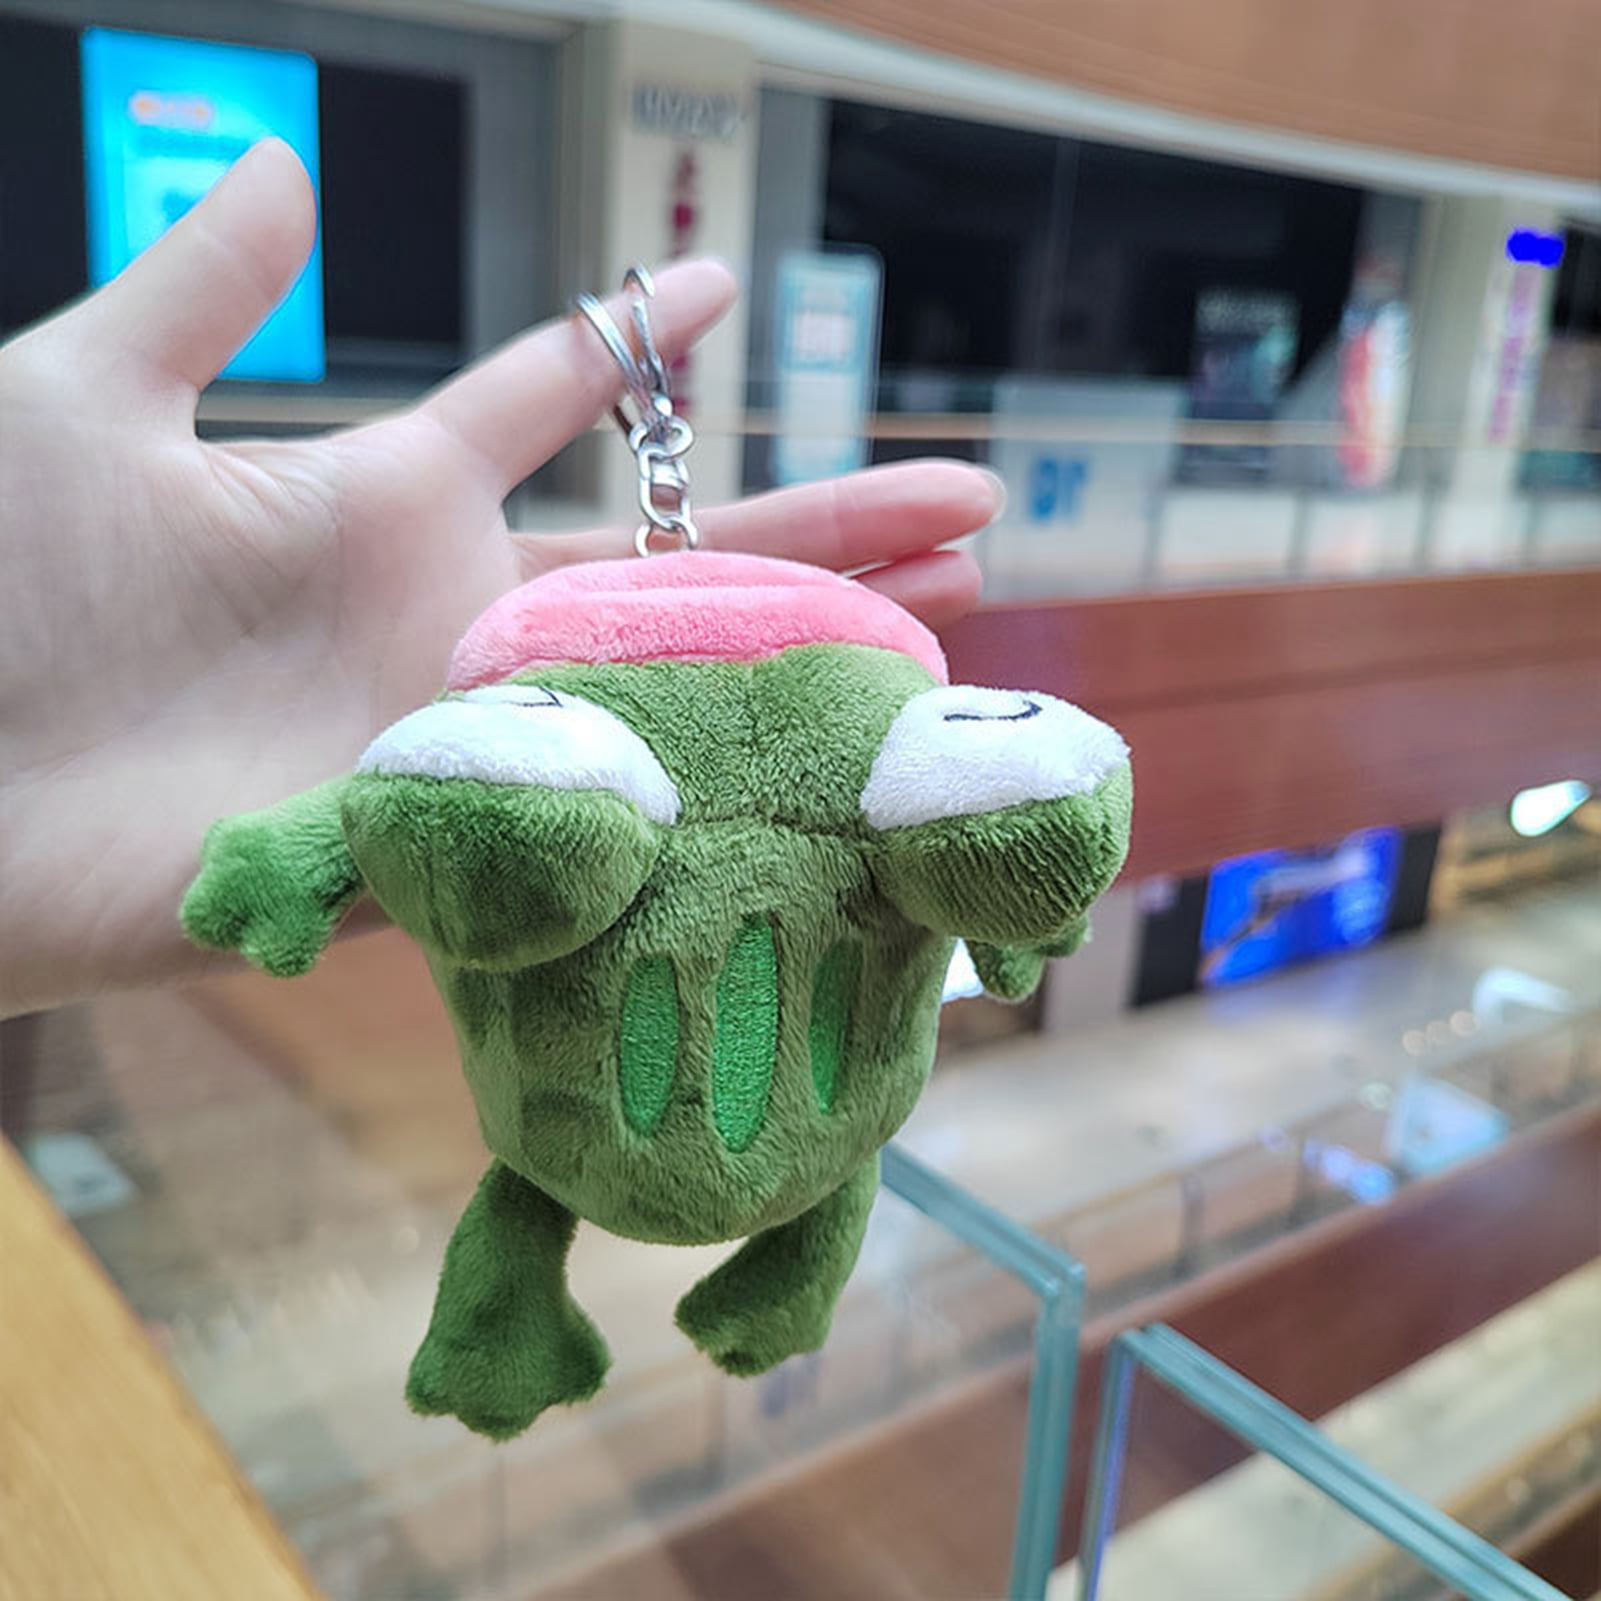 Wholesome Blob the frog keychain